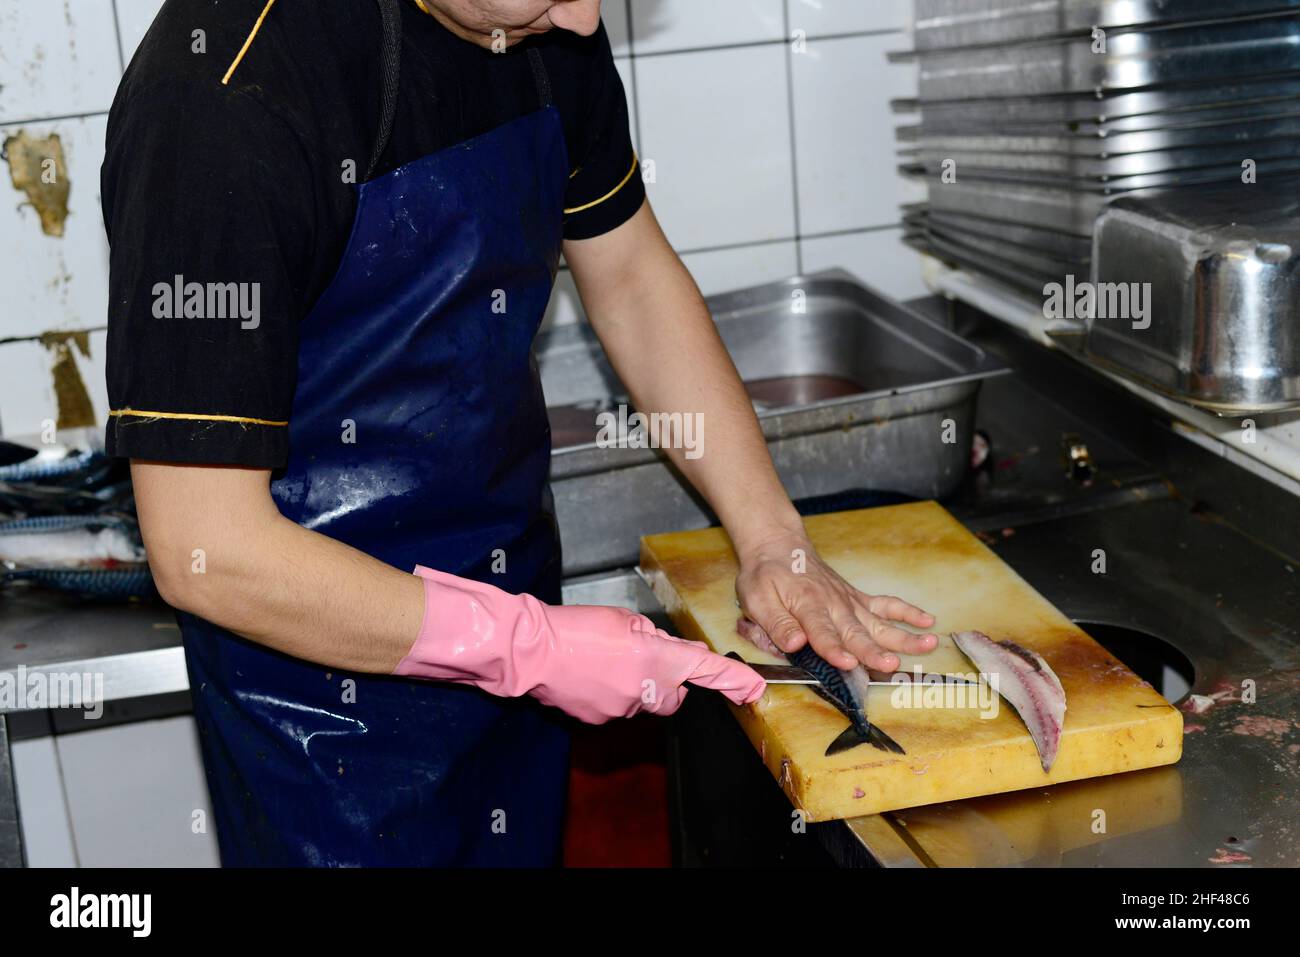 A young Turkish cook slicing Mackerel fish filets for the popular fish sandwiches in Istanbul, Turkey. Stock Photo